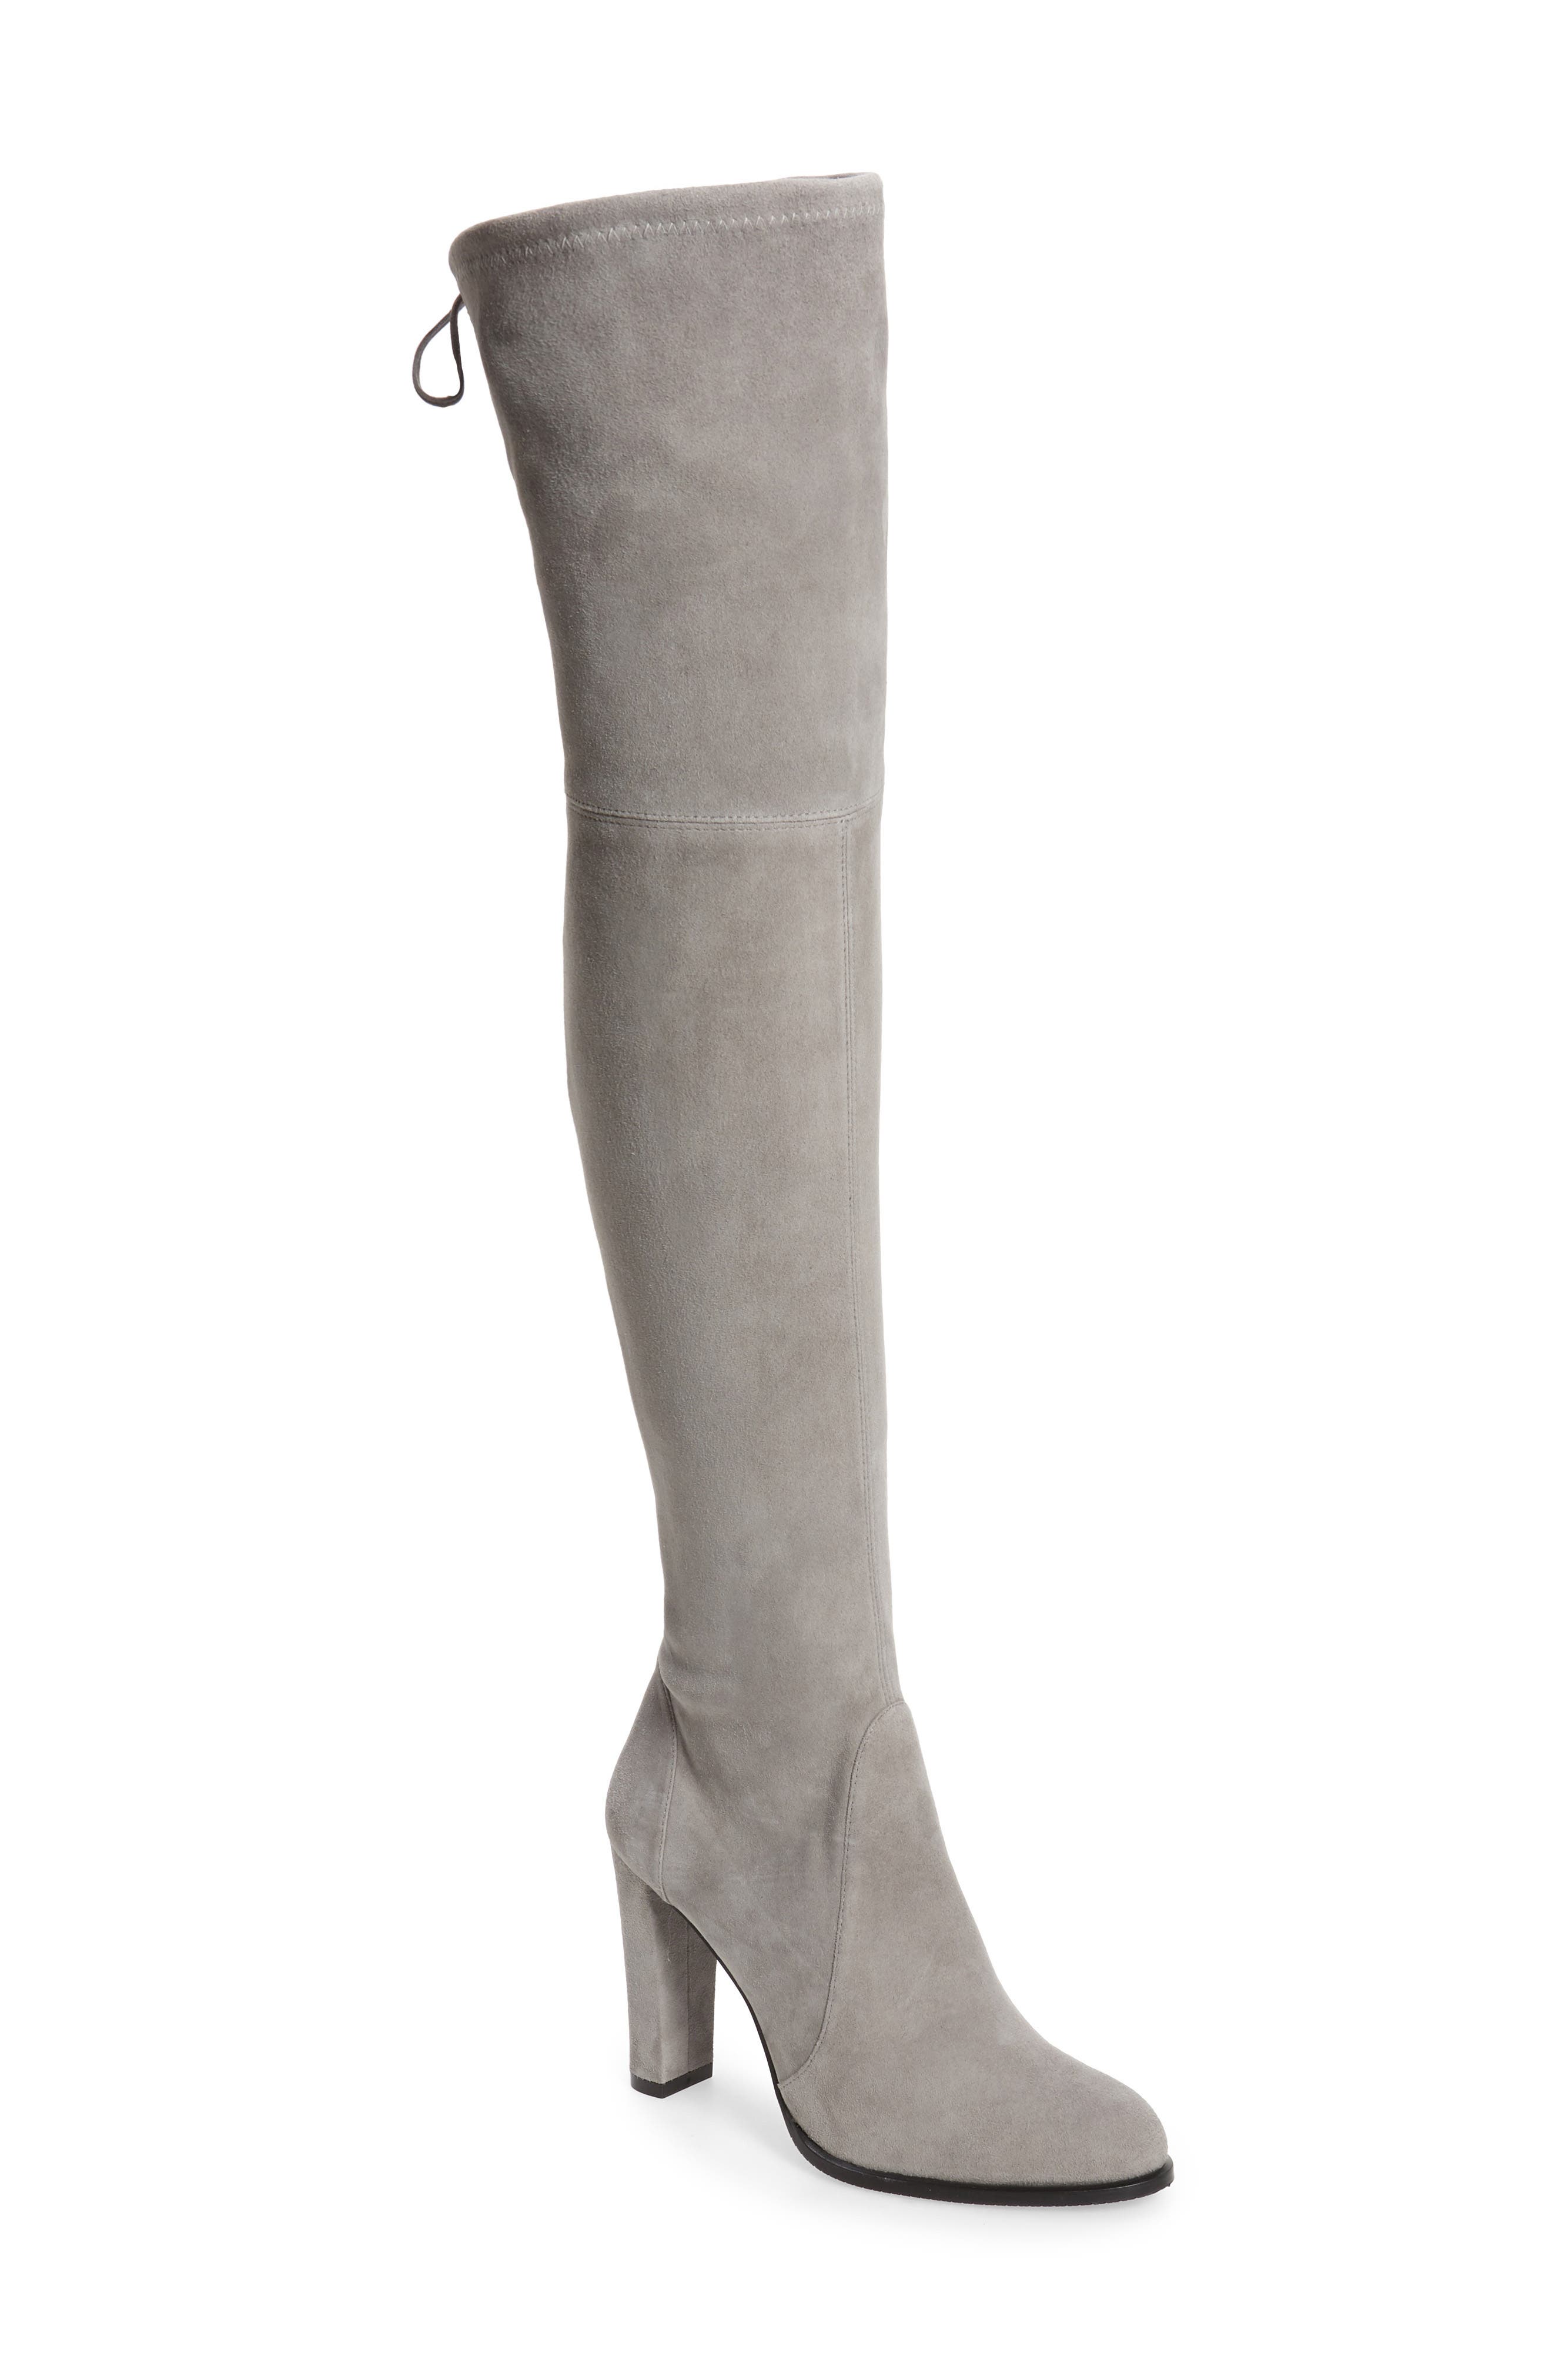 grey over knee high boots